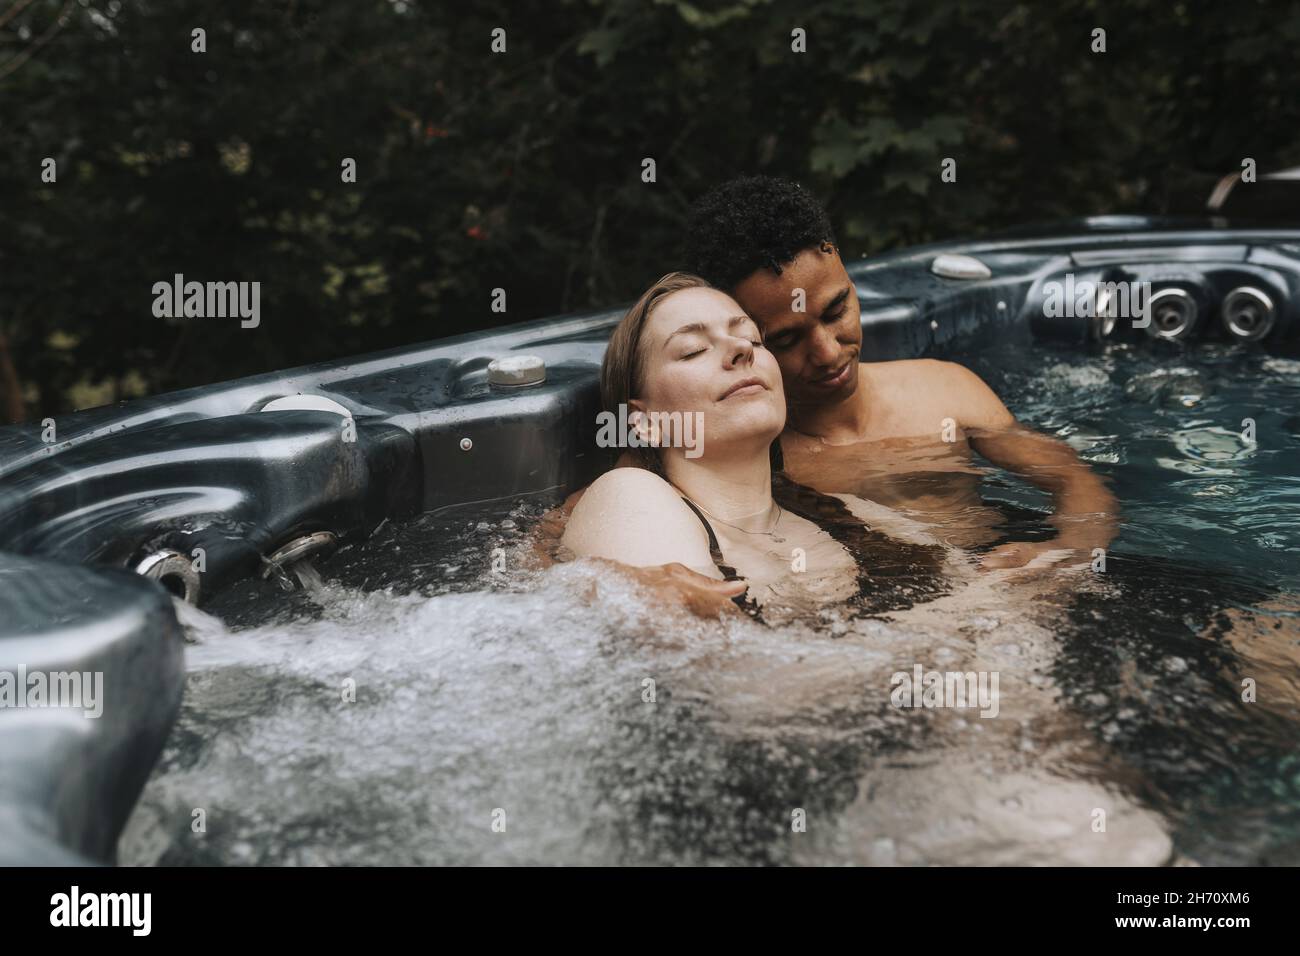 Couple relaxing in hot tub Stock Photo